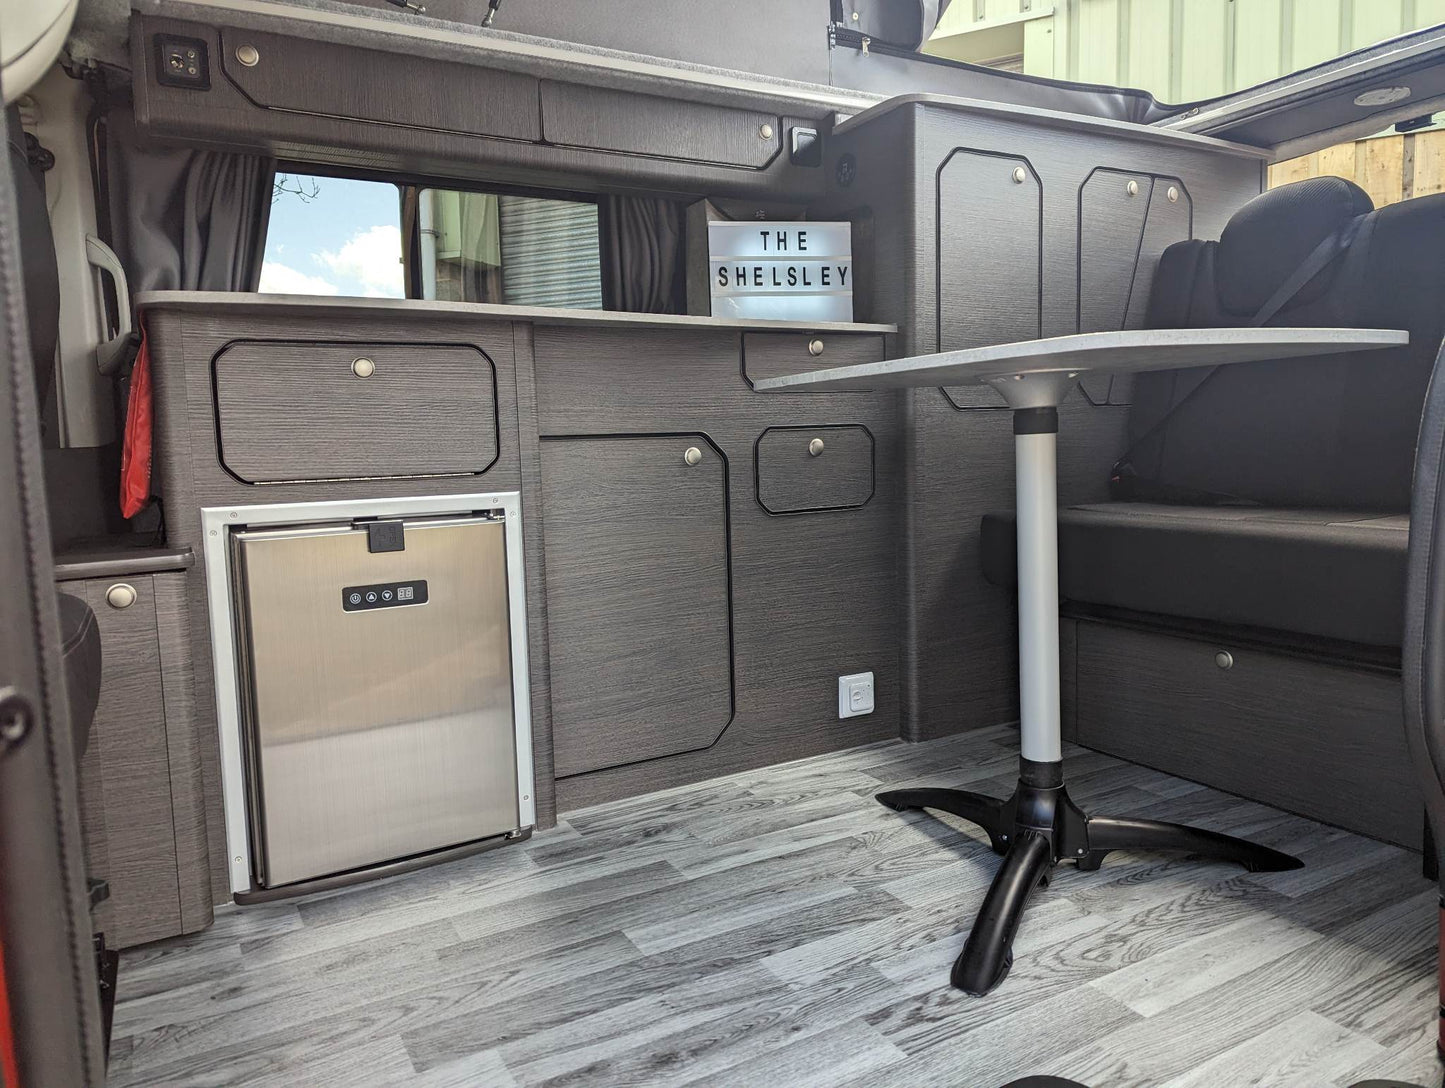 The Shelsley Solo or Duo Camper Van Conversion for the Vauxhall Vivaro, Renault Trafic, Nissan NV300 and Fiat Talento